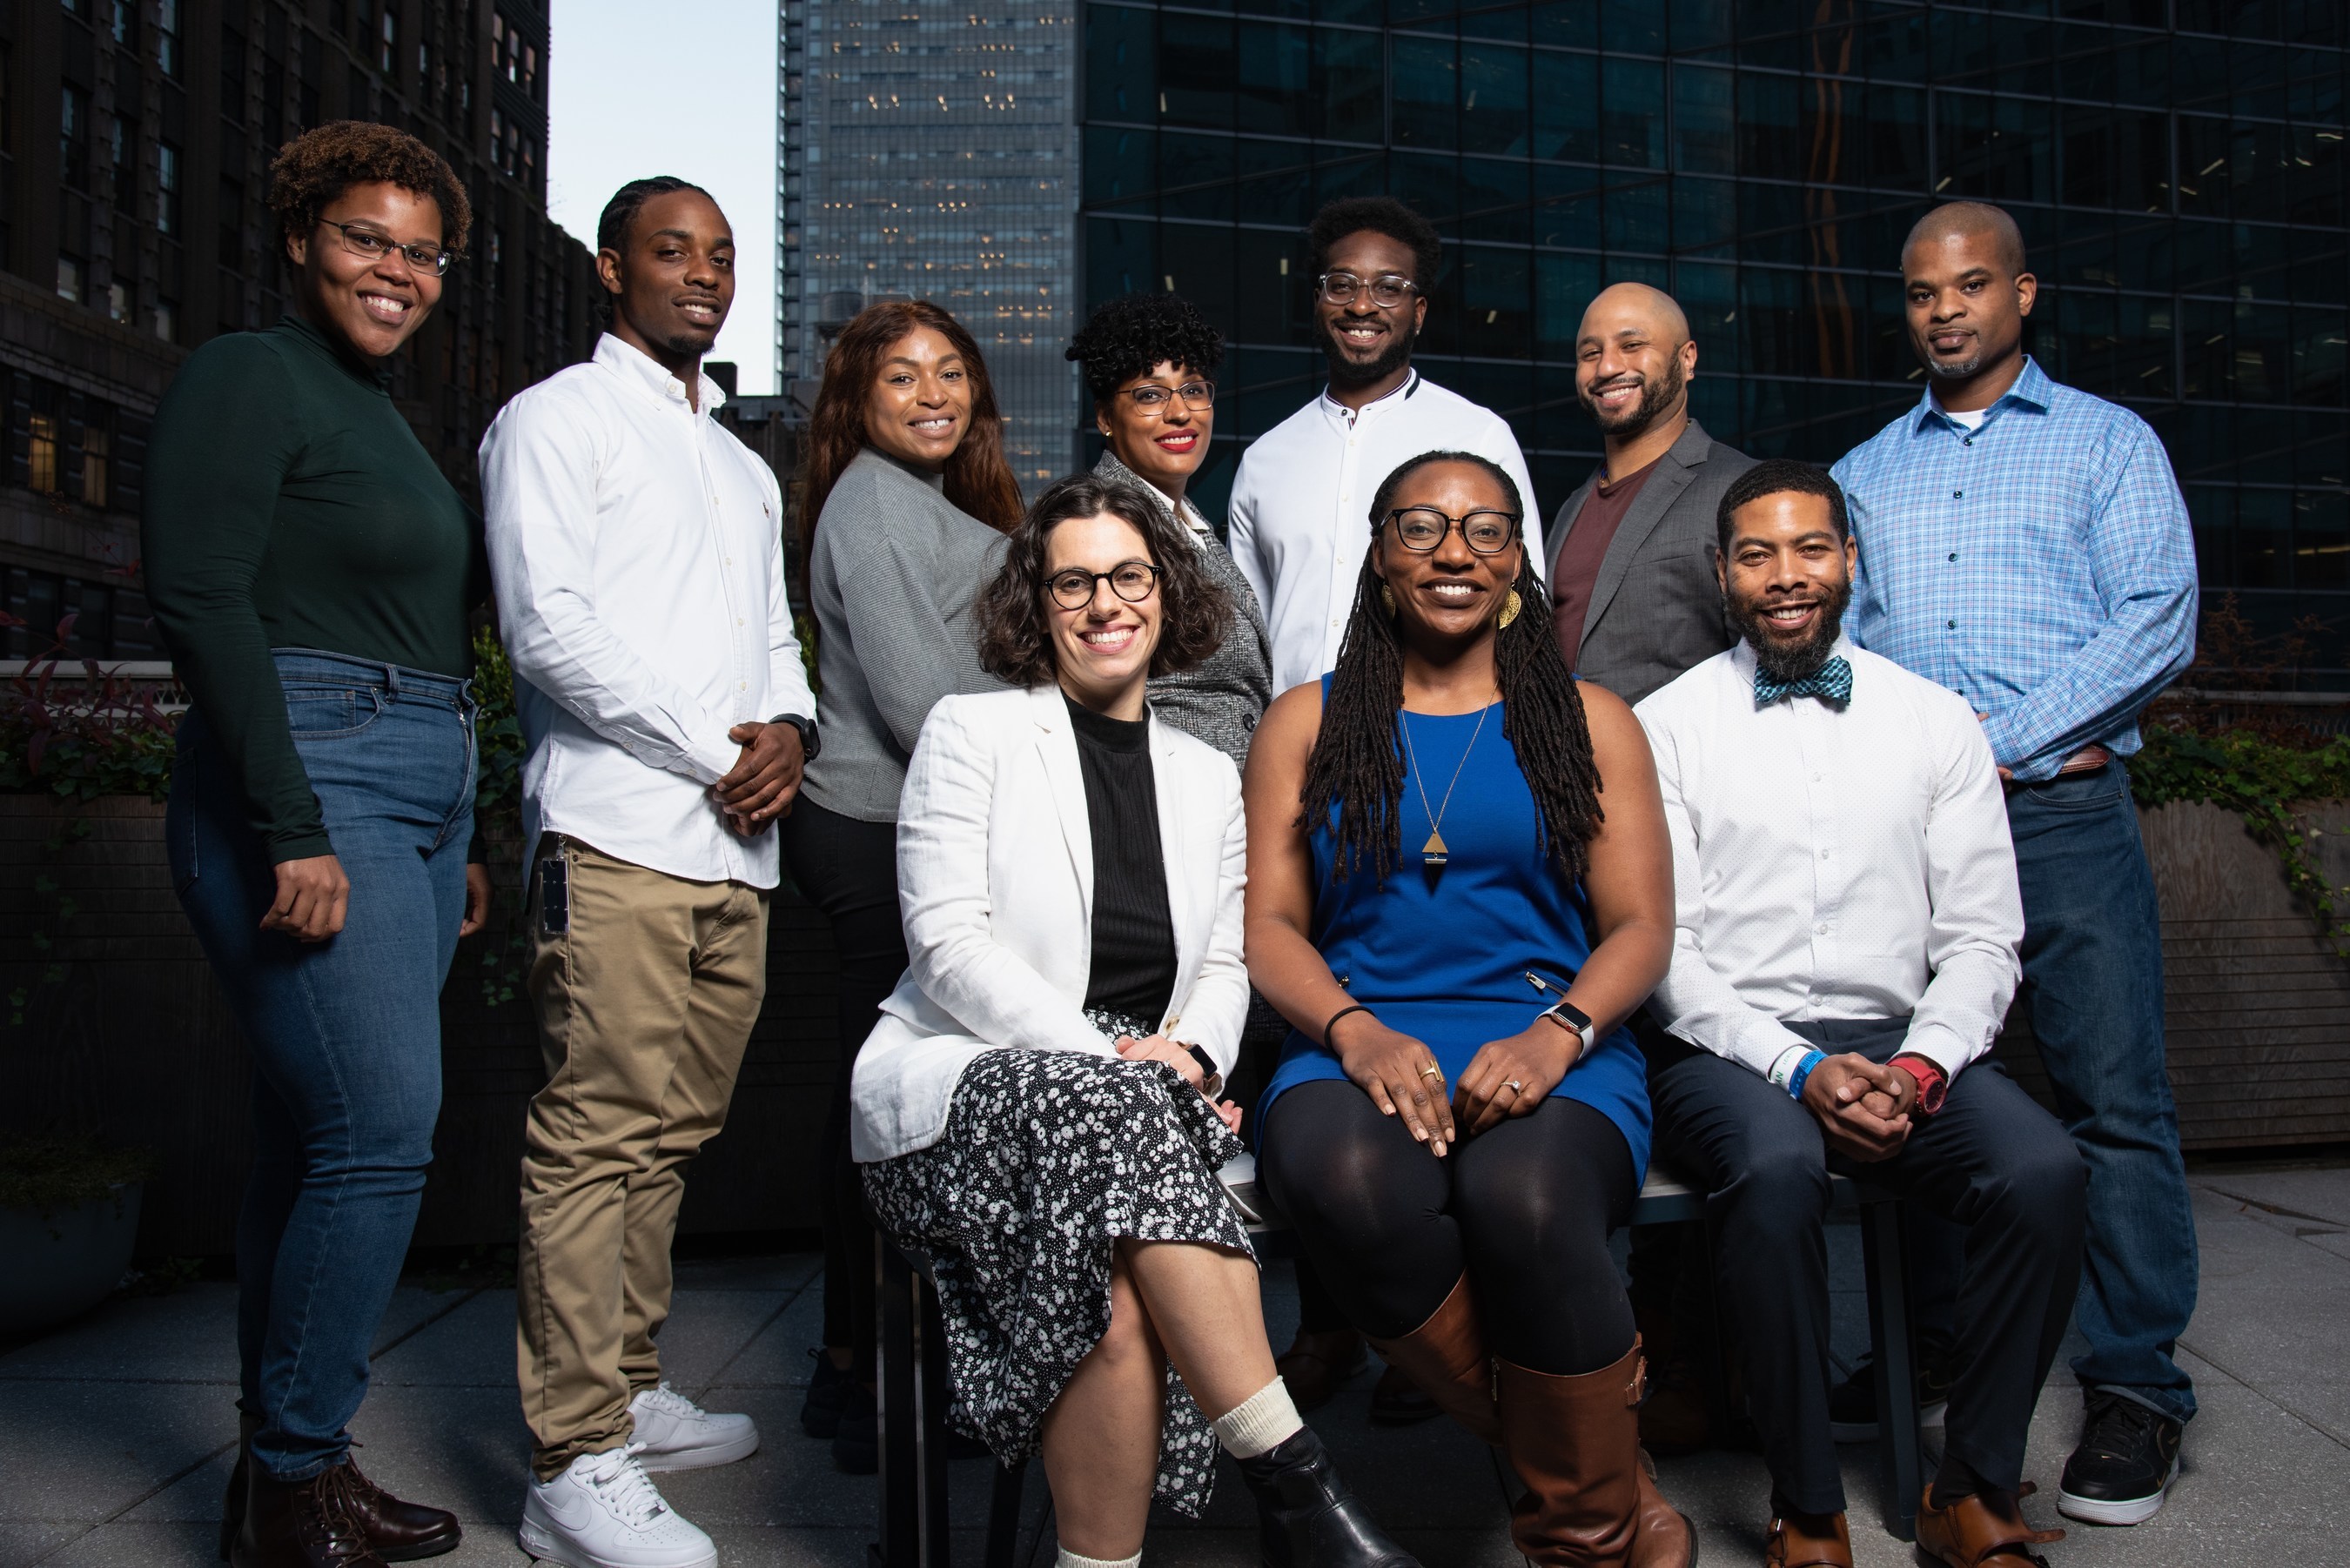 Second Chance Studios Graduates First Class of Formerly Incarcerated Fellows, Partnering with MTV Entertainment Group to Launch Media Careers